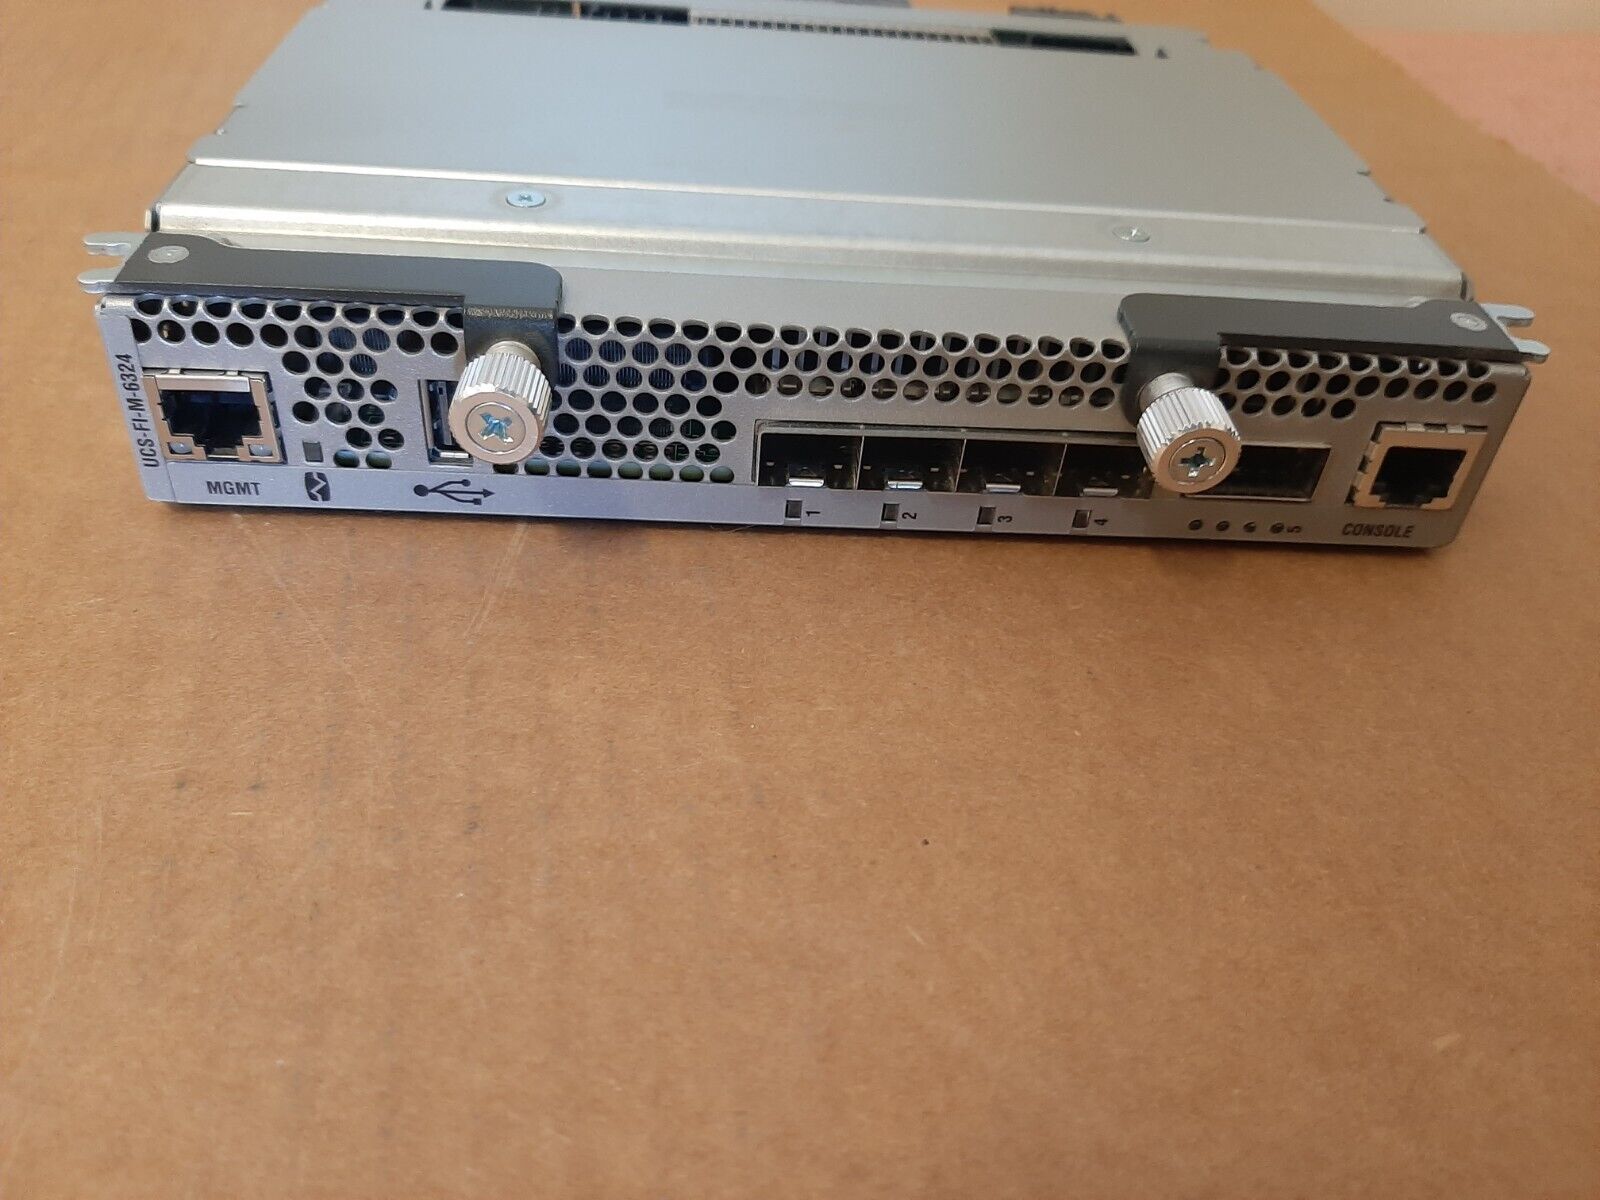 UCS-FI-M-6324, CISCO UCS 6324 In-Chassis FI with 4 UP, 1x40G Exp Port, 16 10Gb